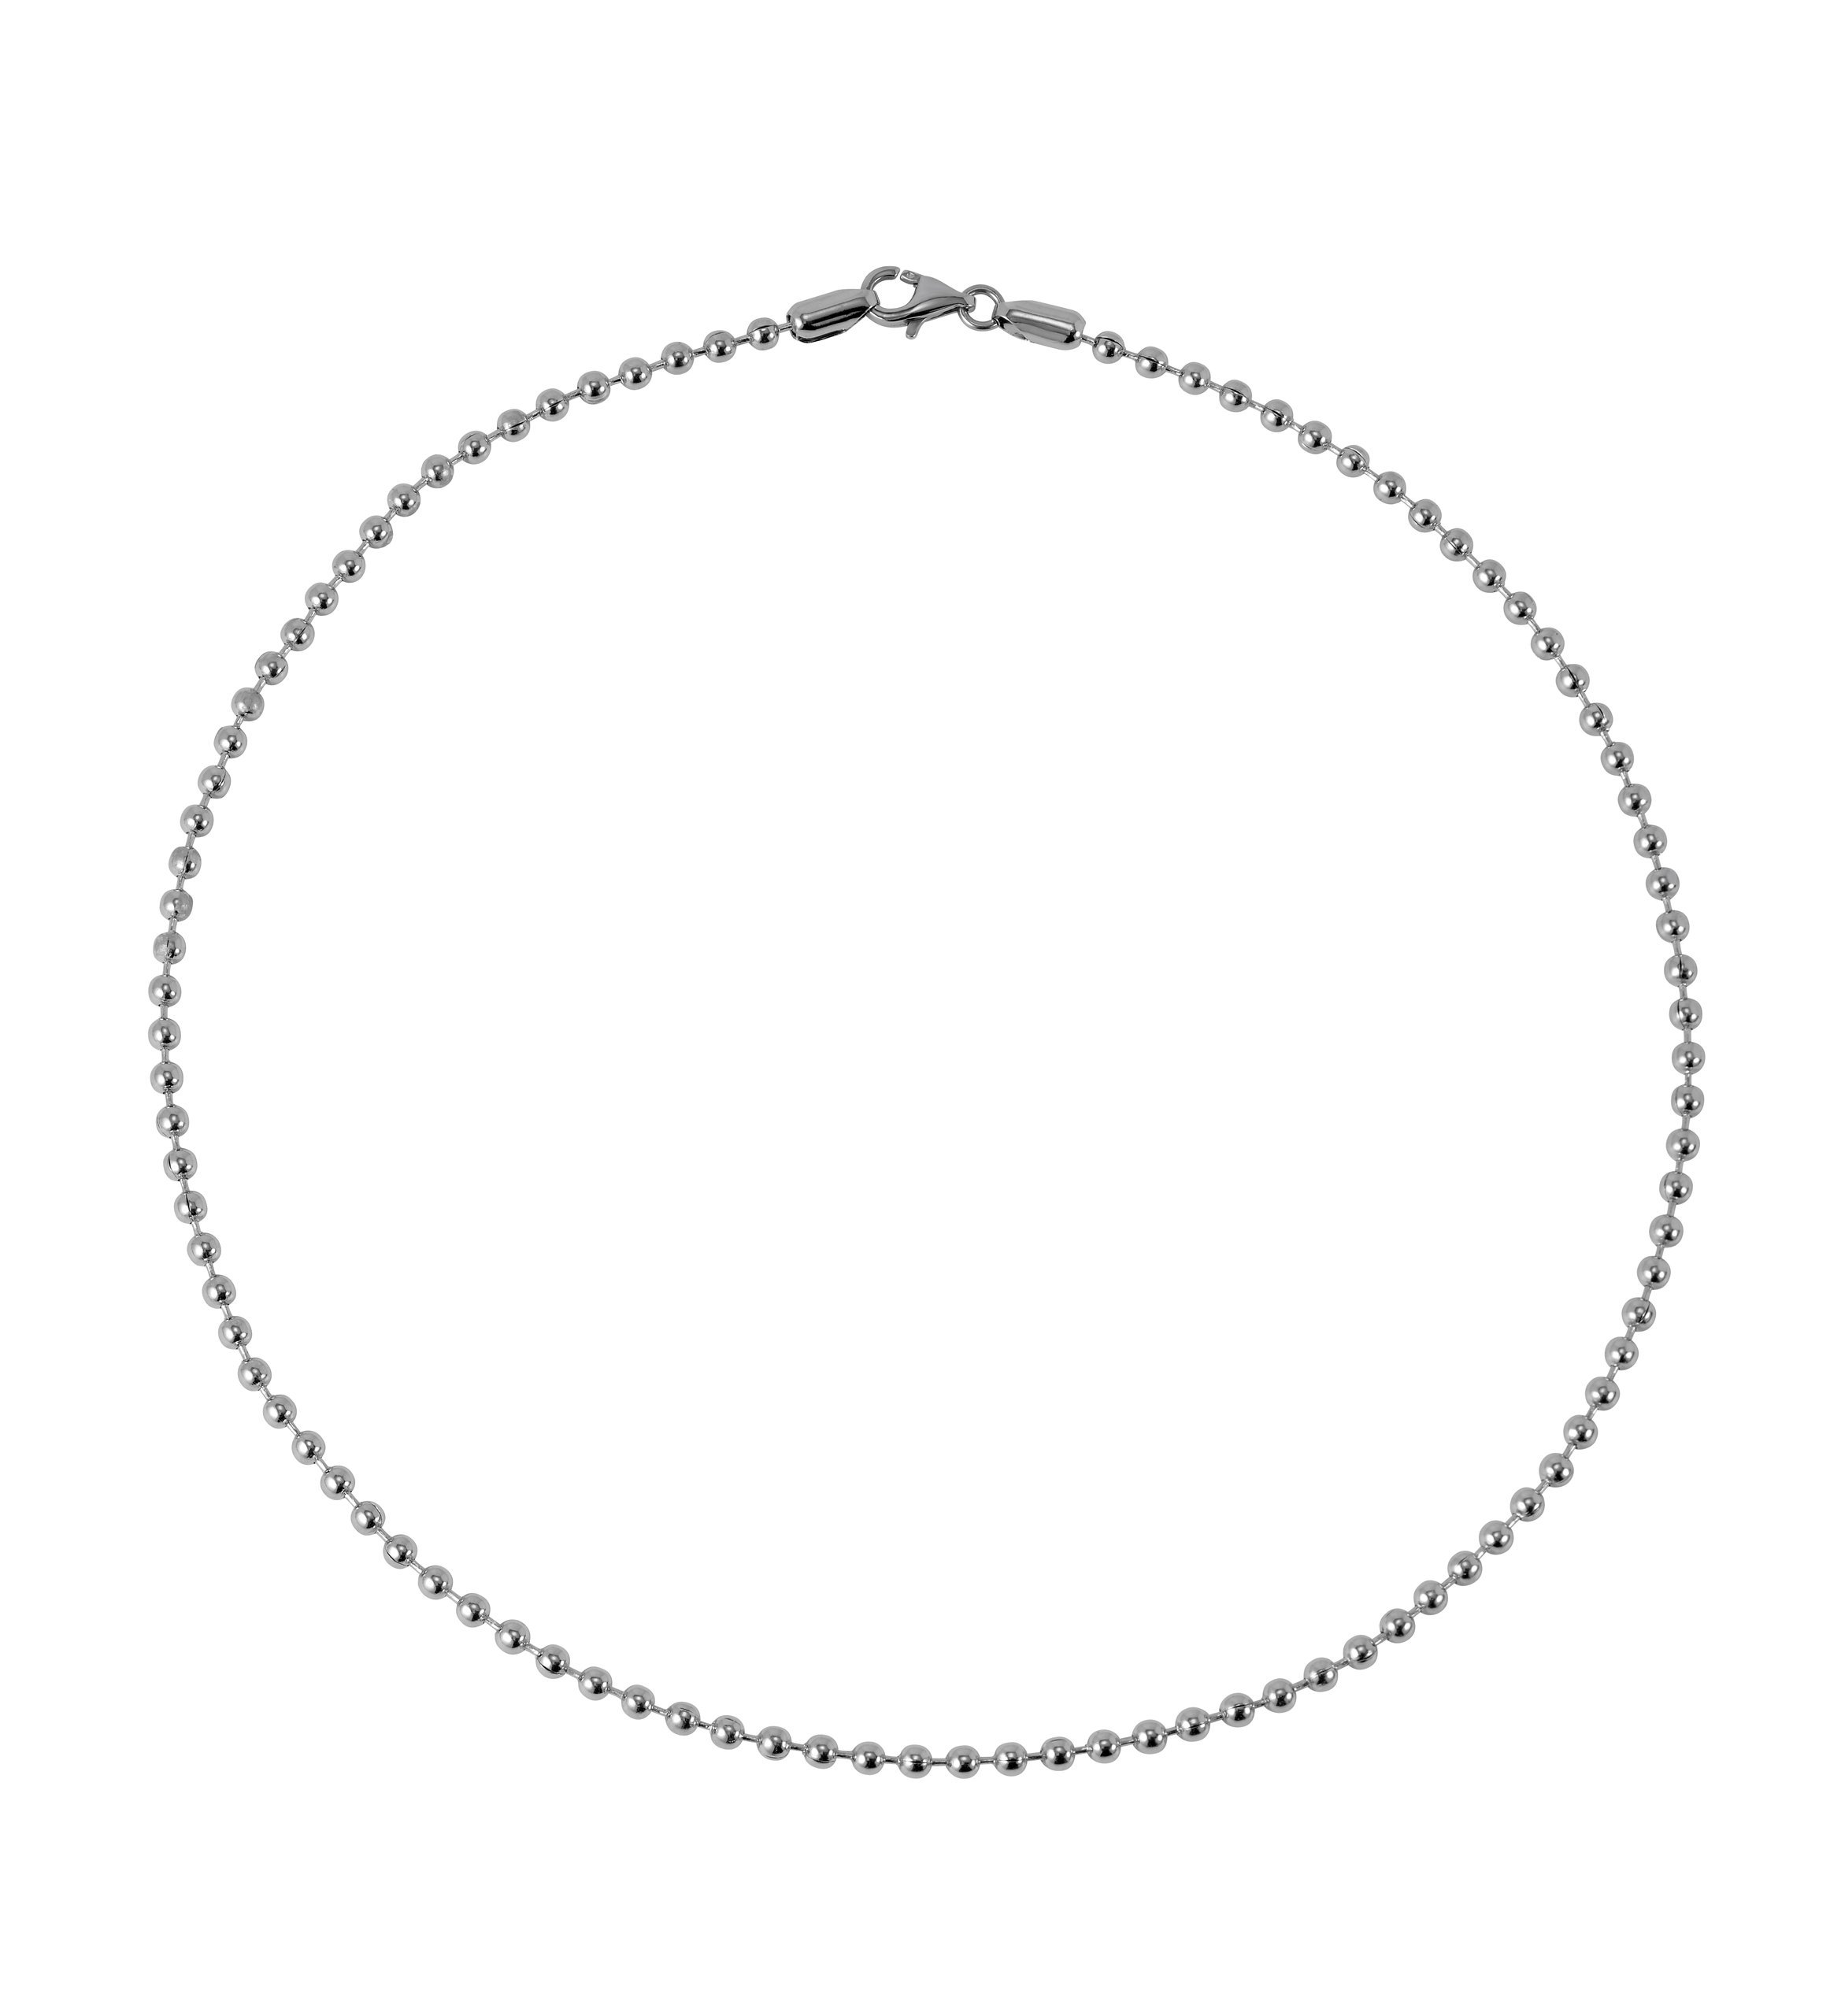 Stainless Steel 2.4 mm Bead 30" Chain